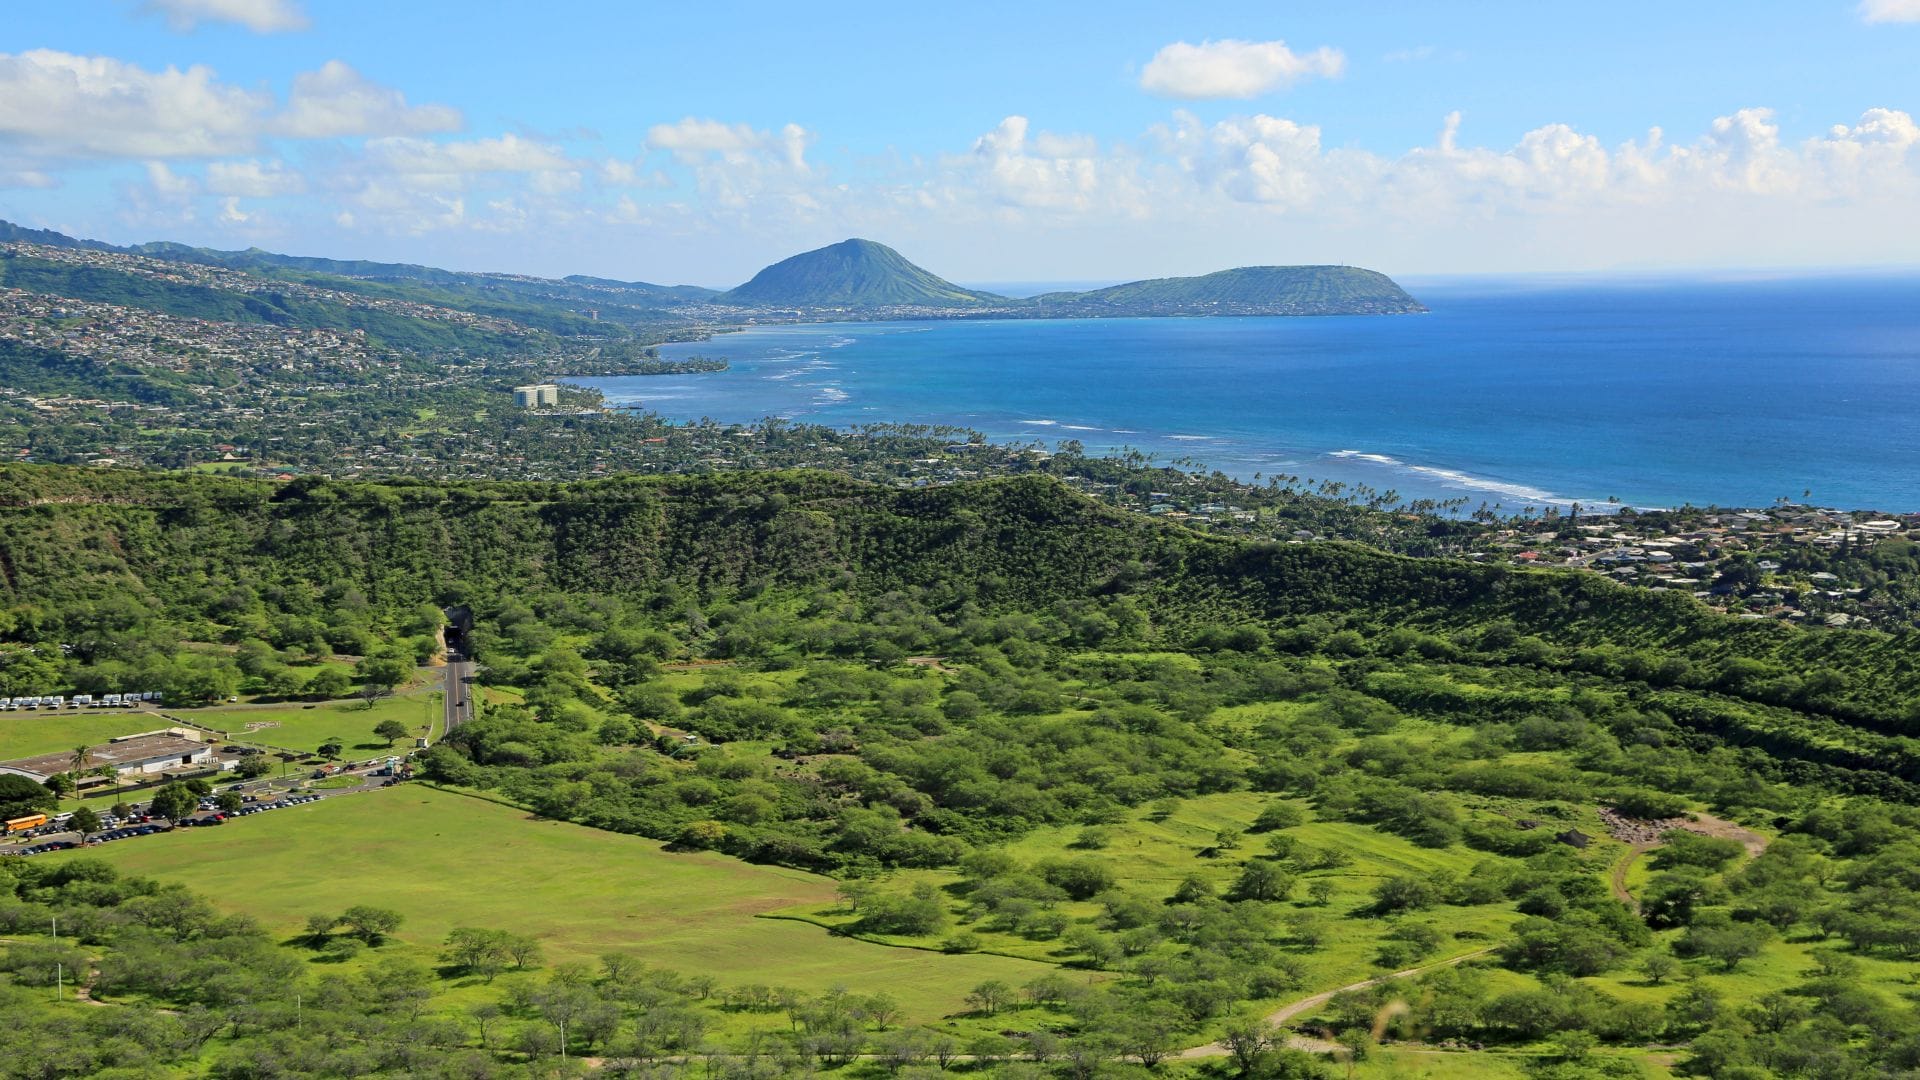 Preparing-for-Your-Climb-on-Koko-Head-Crater